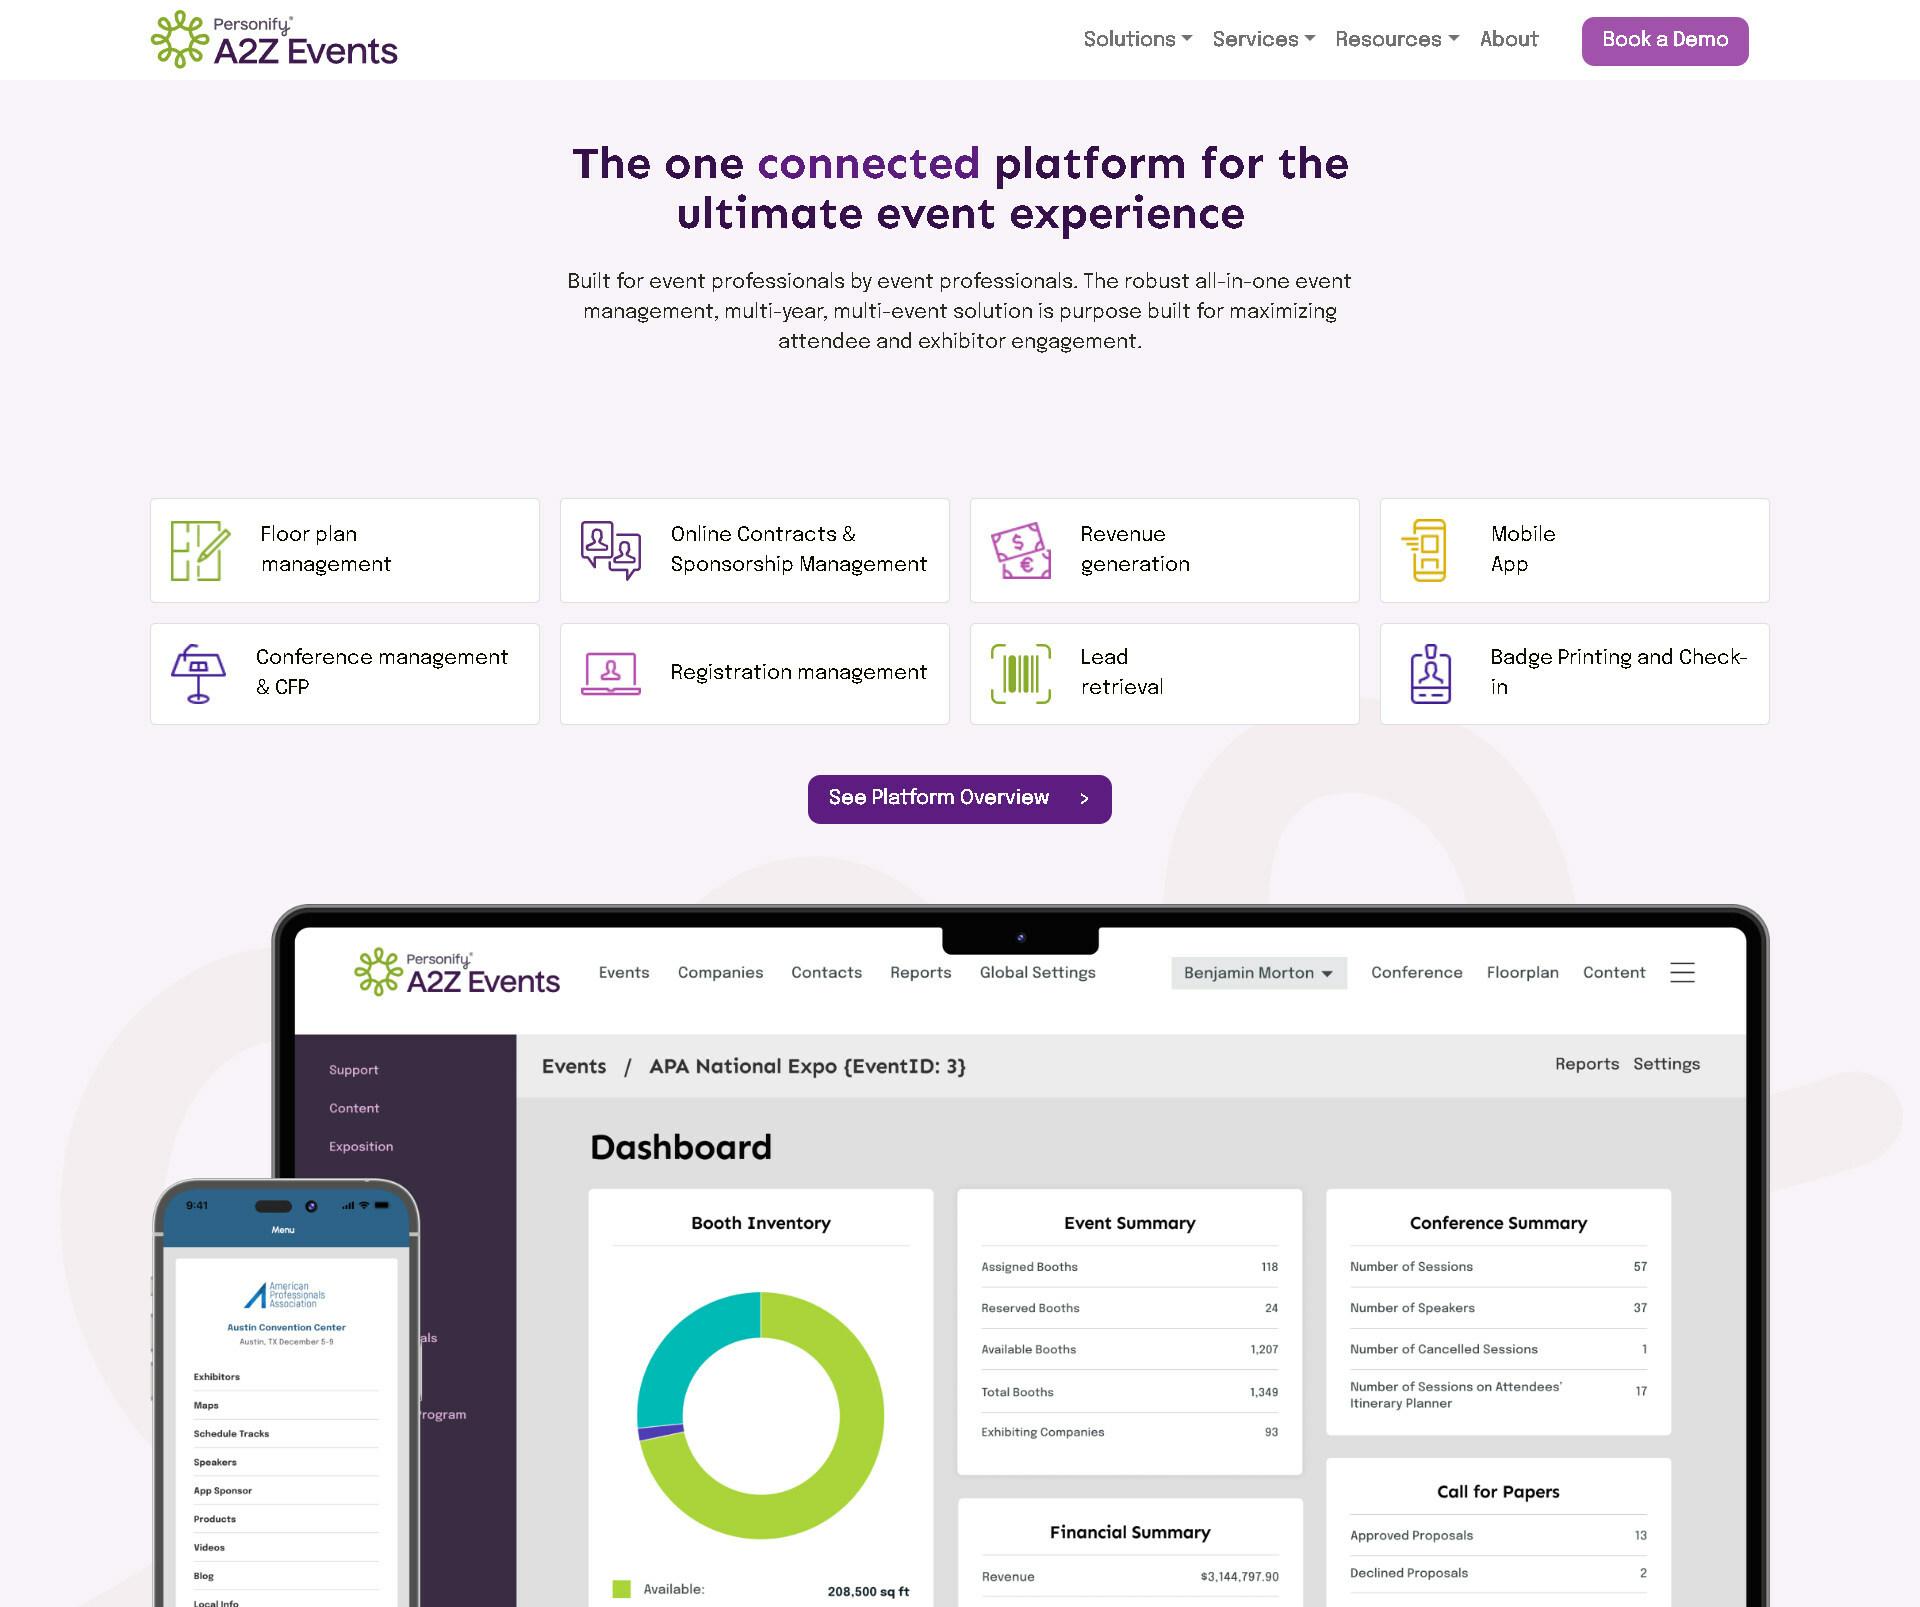 Personify Launches New A2Z Events Website and Announces GTR is Now Registration Tech